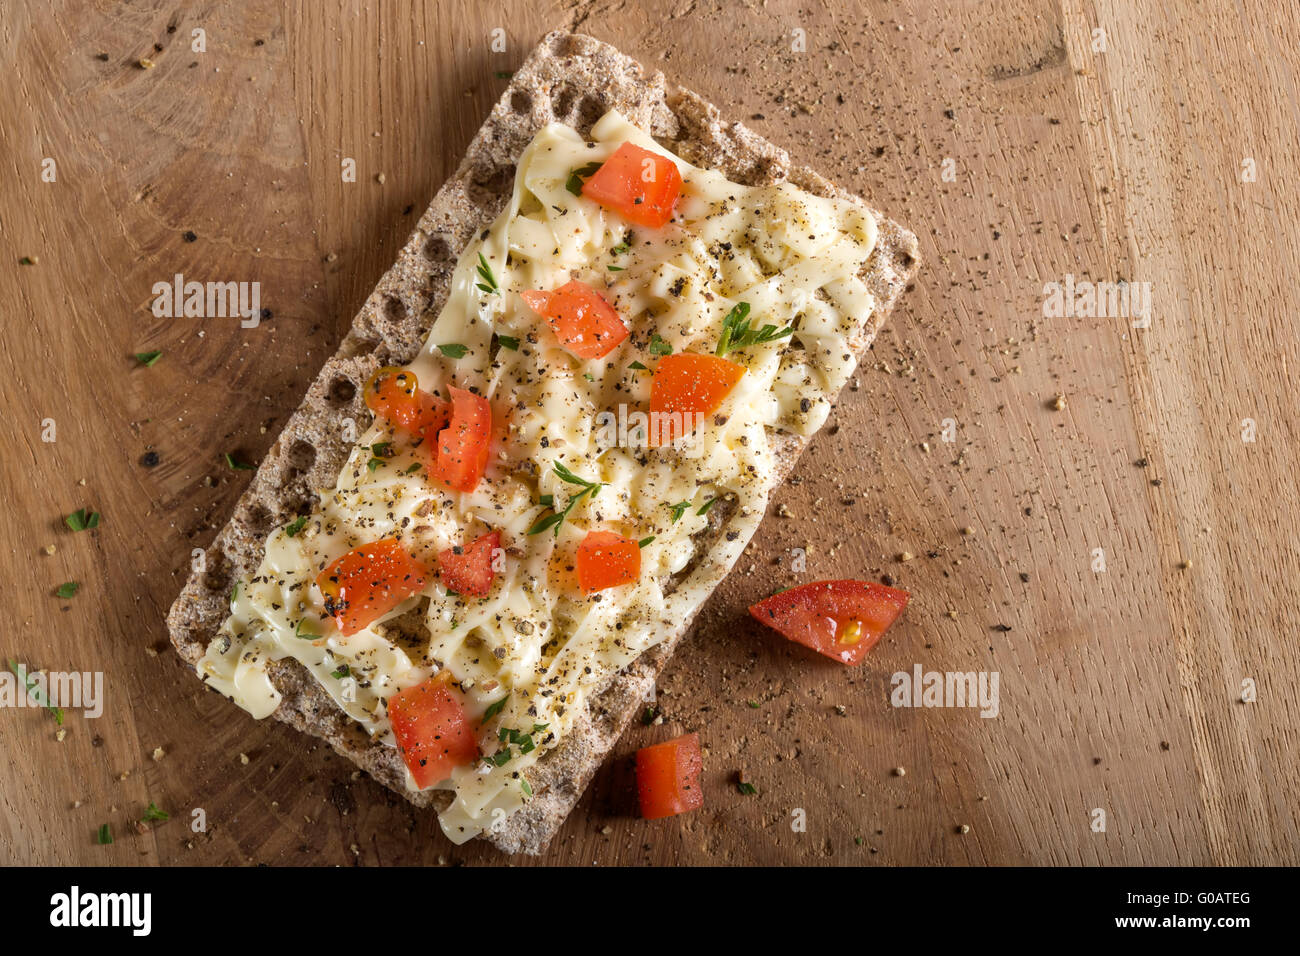 Crispbread with cheese, tomato and spices on wooden background. Healthy breakfast. Stock Photo